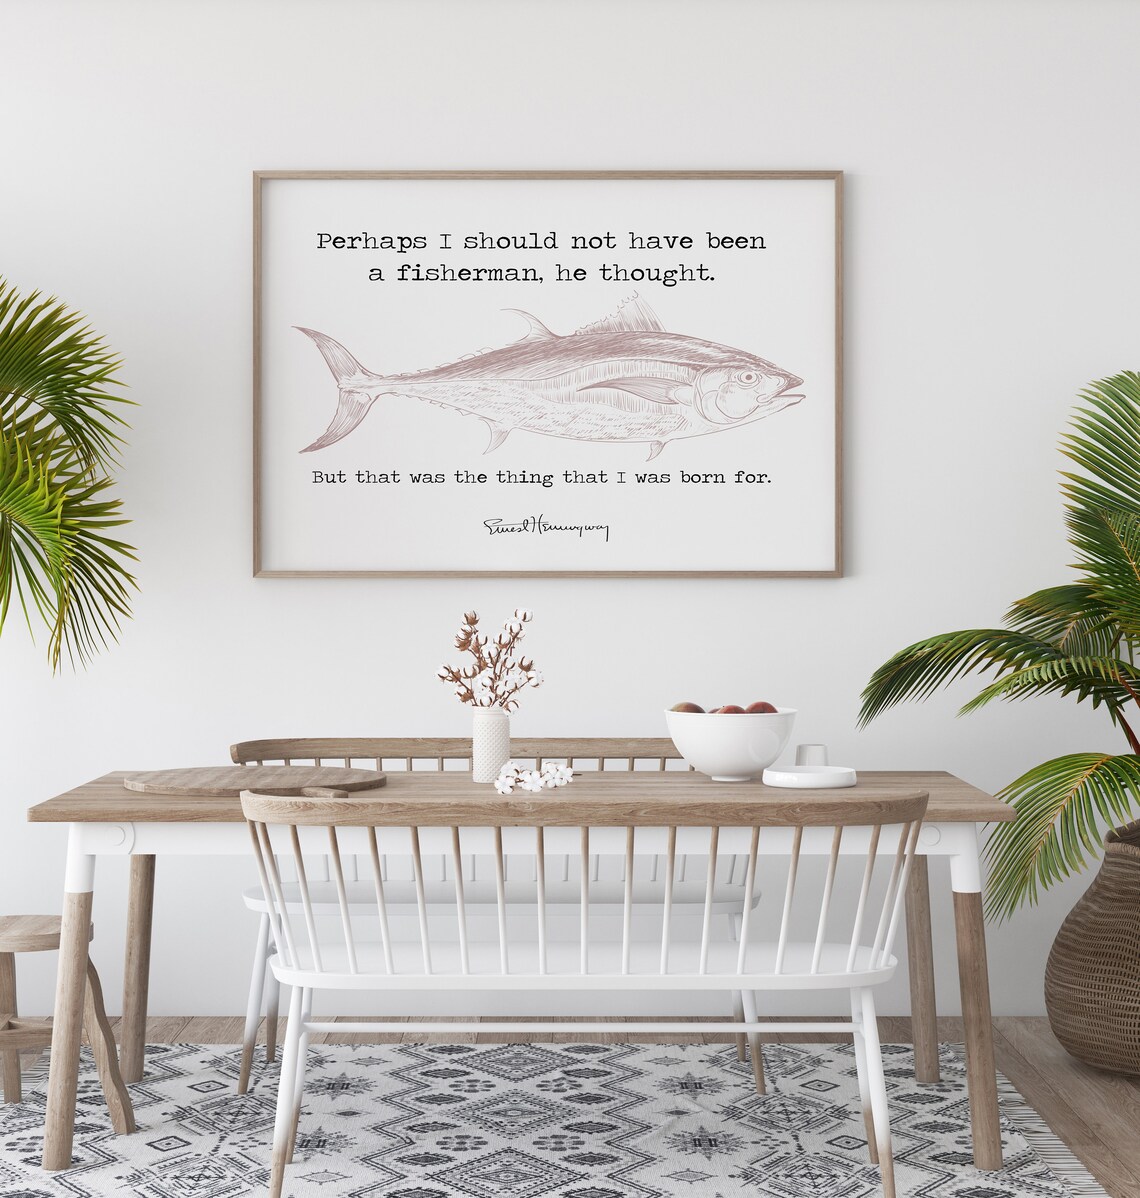 Hemingway Quote Fishing Quote From the Old Man and the Sea | Etsy